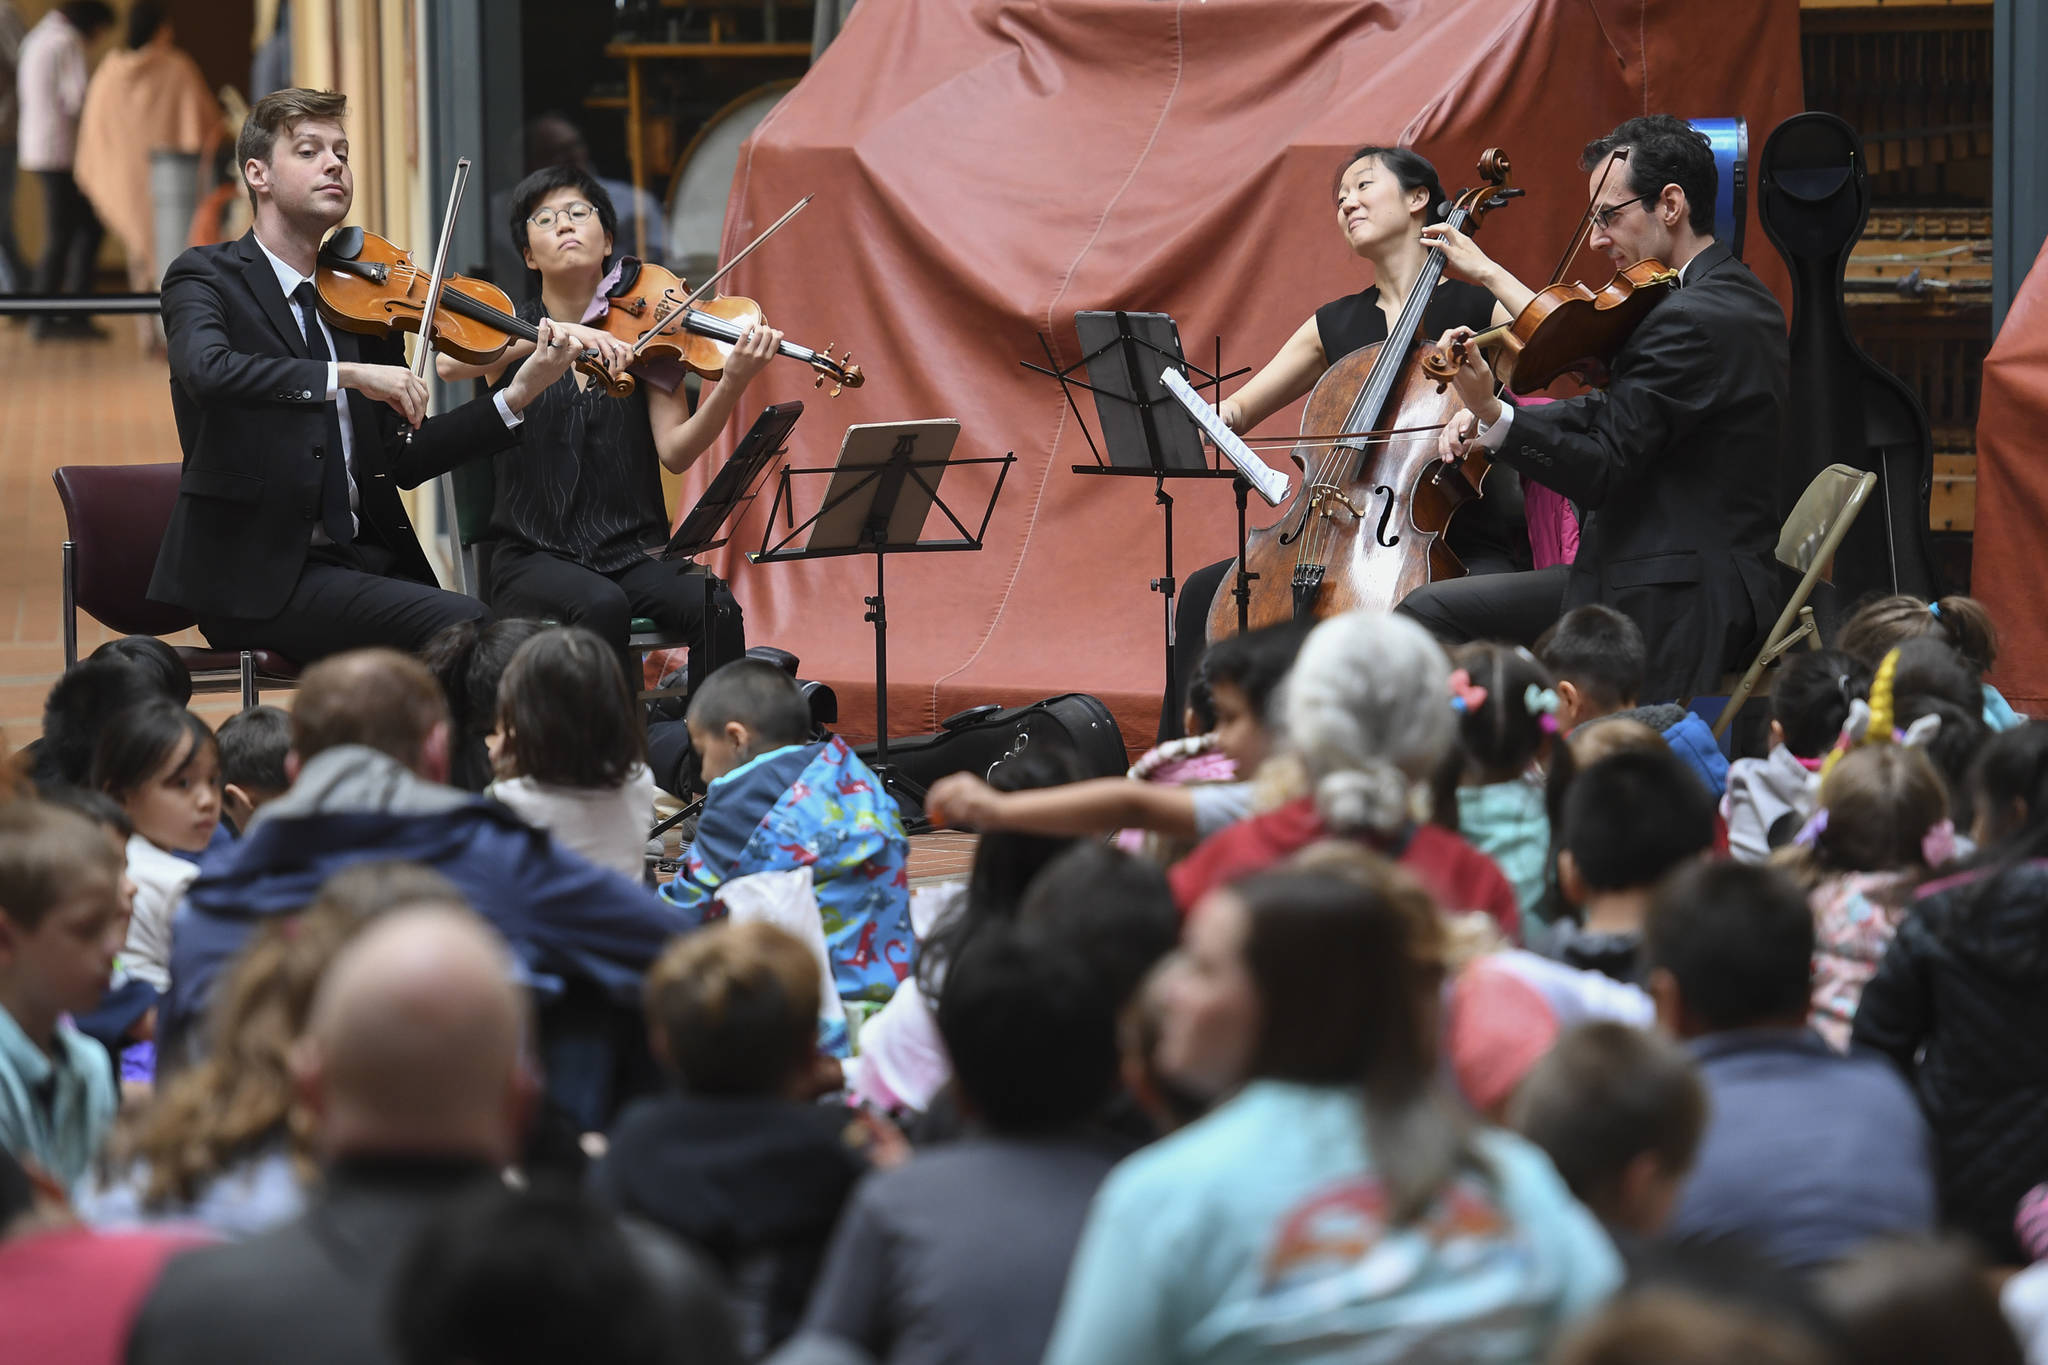 Members of the Argus String Quartet play a Brown Bag Concert at the State Office Building on Wednesday, May 15, 2019, during the annual Juneau Jazz Classics Festival. COVID-19 forced the festival online in 2020, but organizers are looking forward to a hybrid festival in May. (Michael Penn/Juneau Empire File)